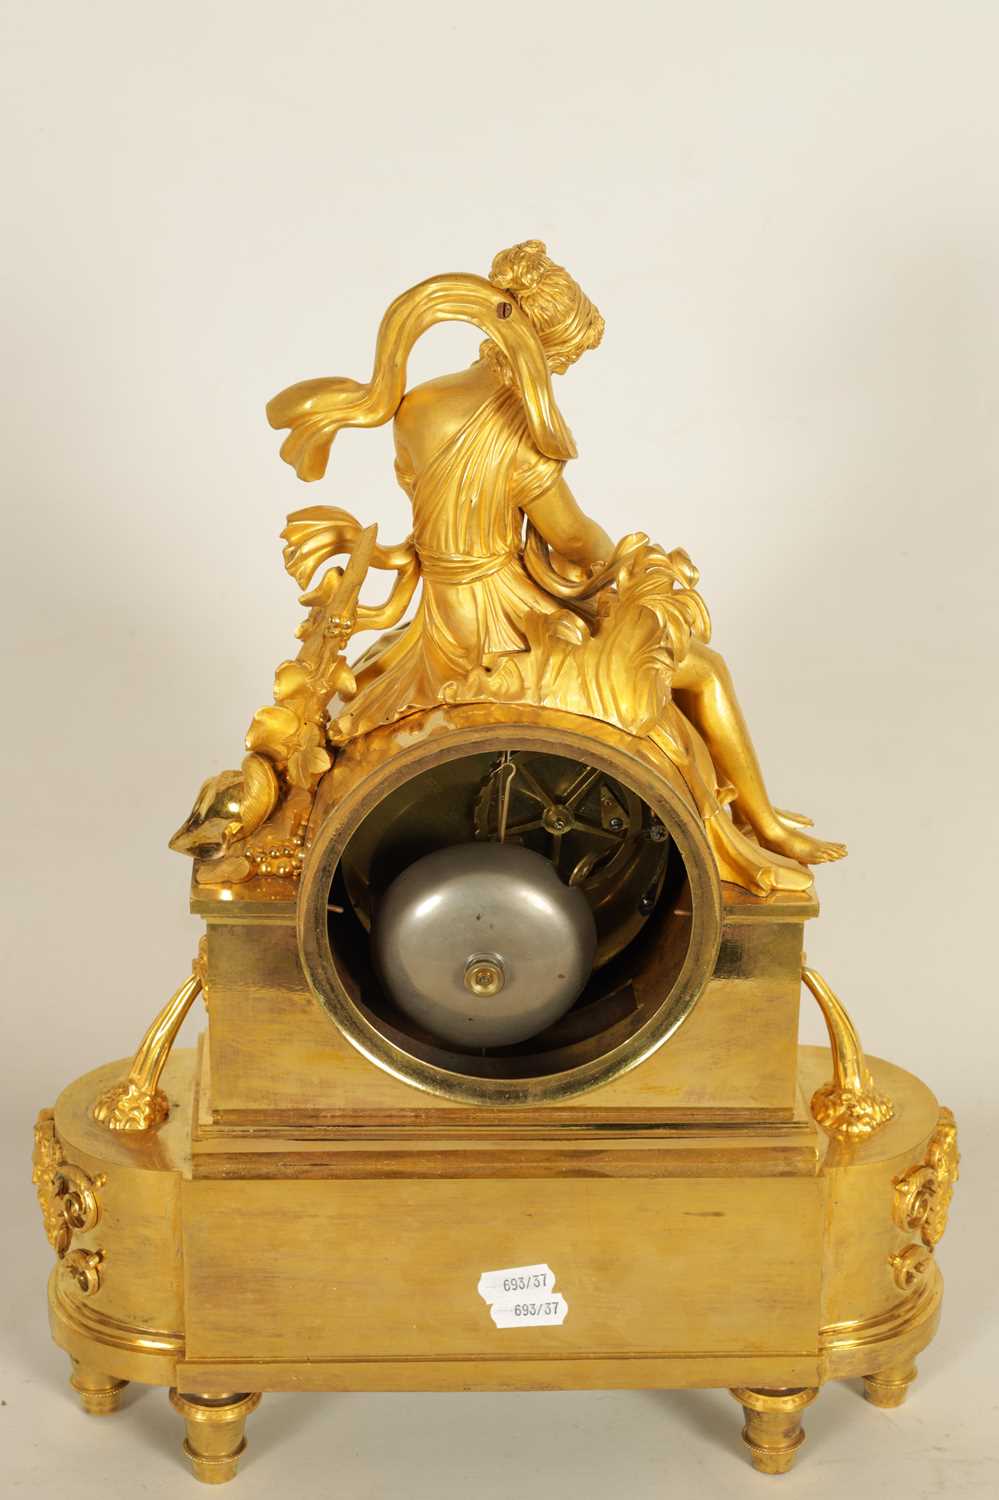 AN EARLY 19TH CENTURY FRENCH EMPIRE ORMOLU FIGURAL MANTEL CLOCK - Image 11 of 12